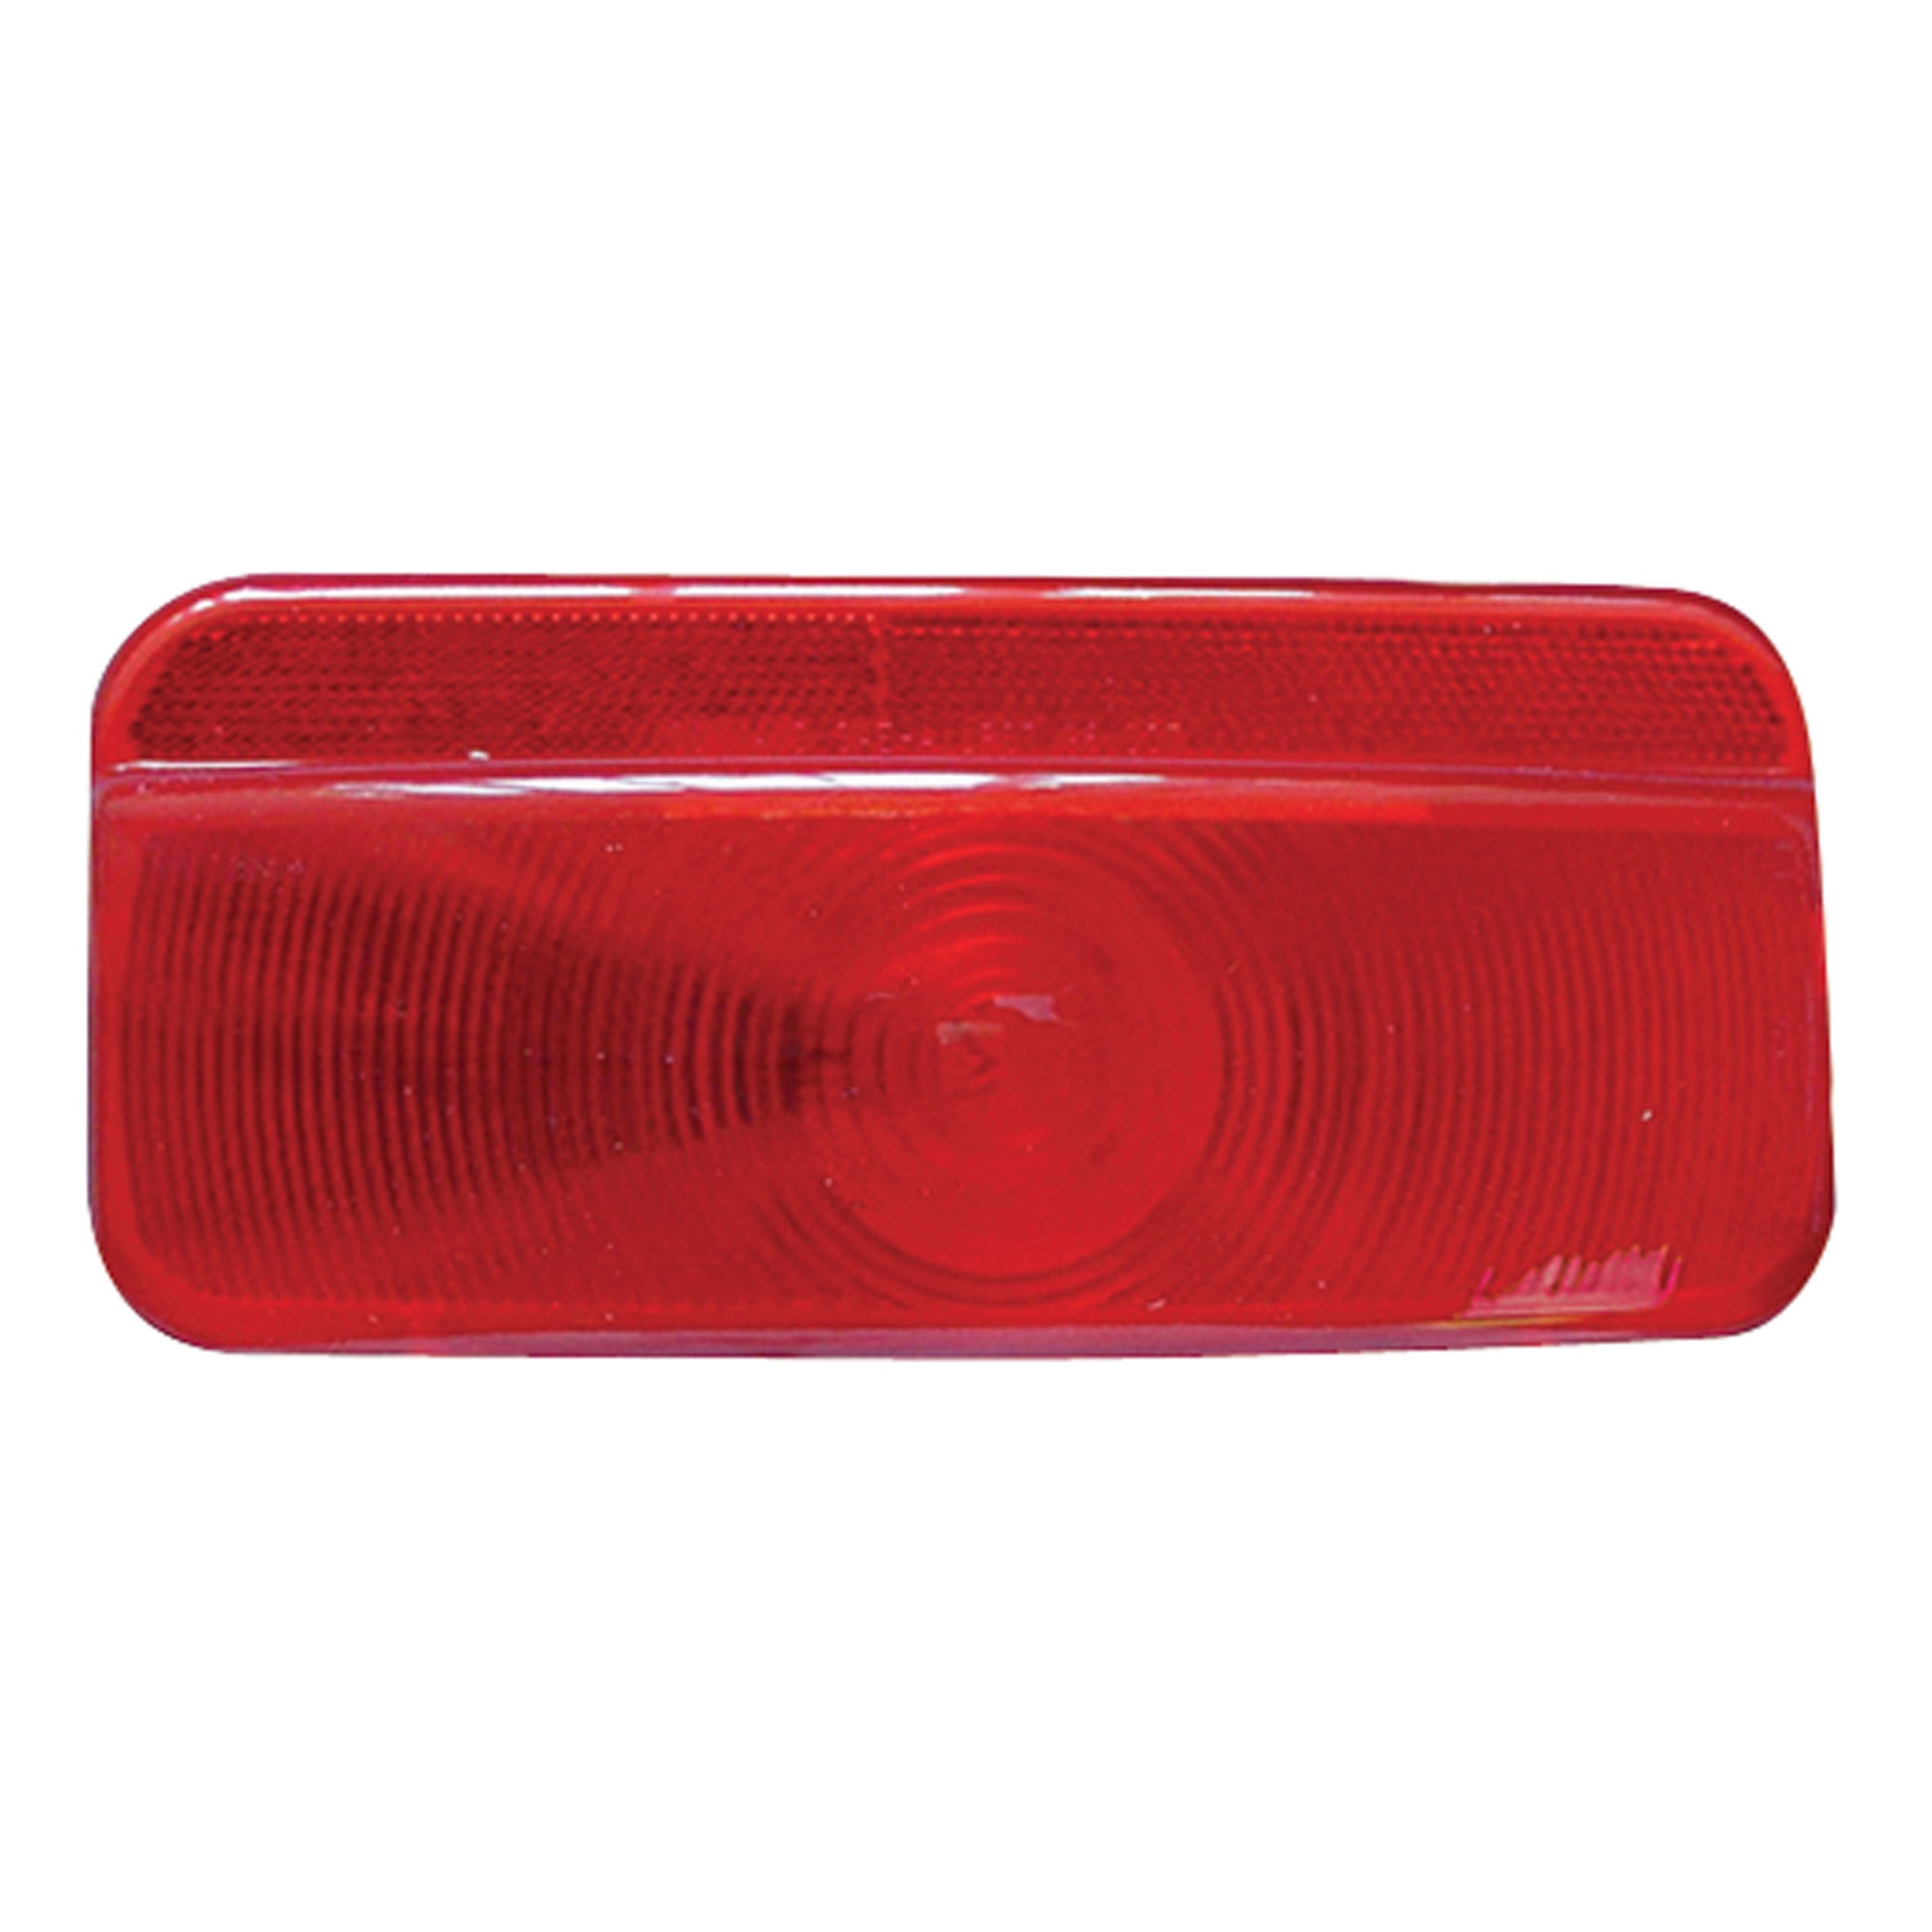 Fasteners Unlimited 89-187 Surface Mount 12 Volt Taillight - Red Replacement Lens